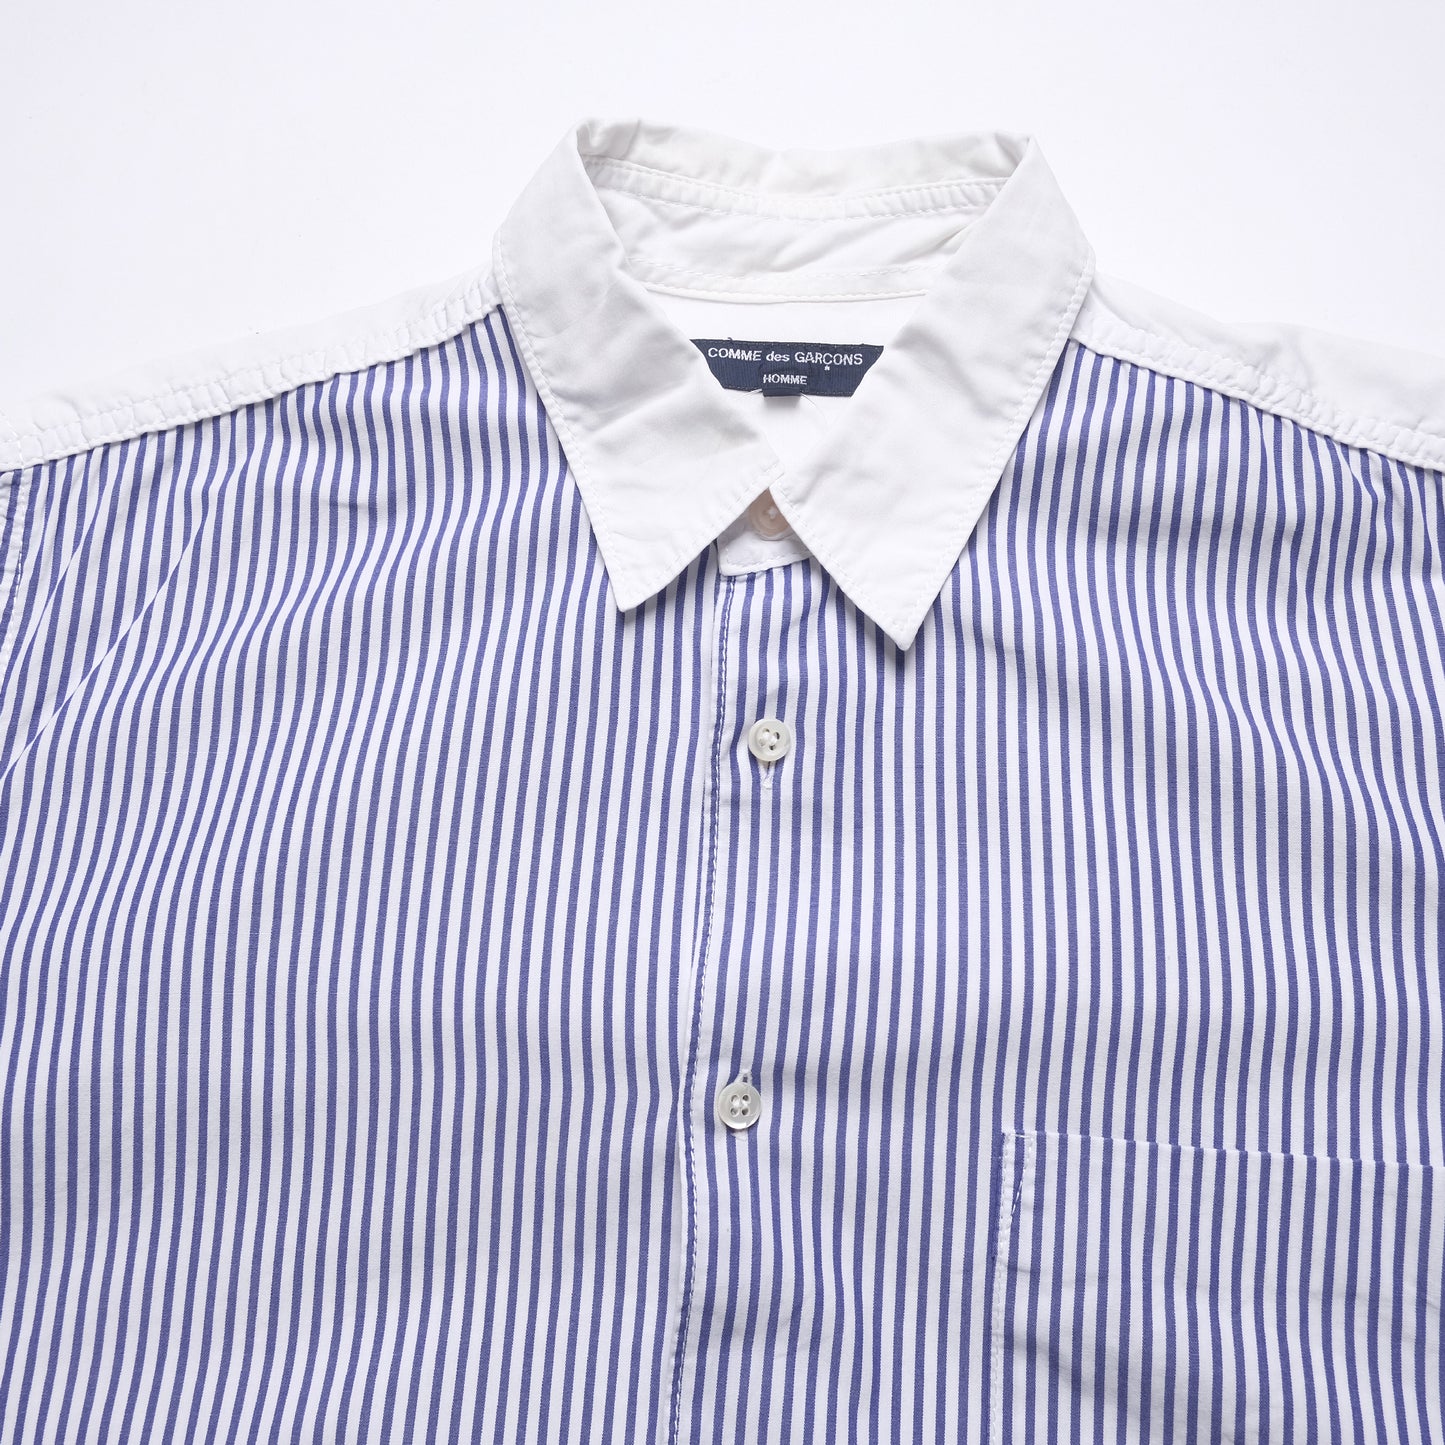 CDG Homme White Stripped Button Up